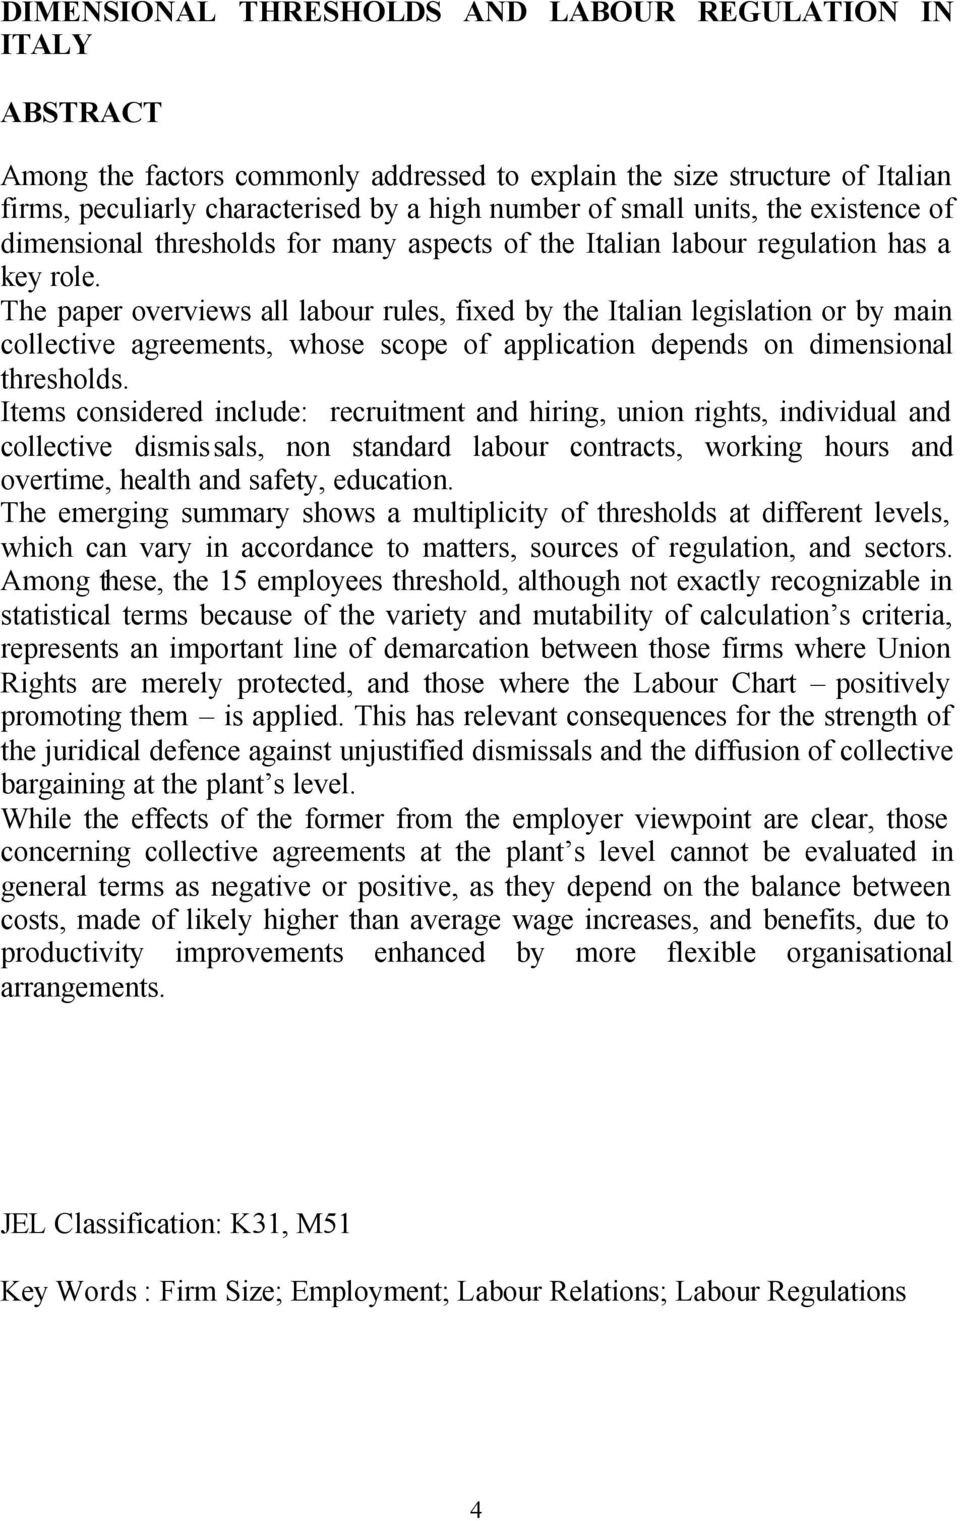 The paper overviews all labour rules, fixed by the Italian legislation or by main collective agreements, whose scope of application depends on dimensional thresholds.